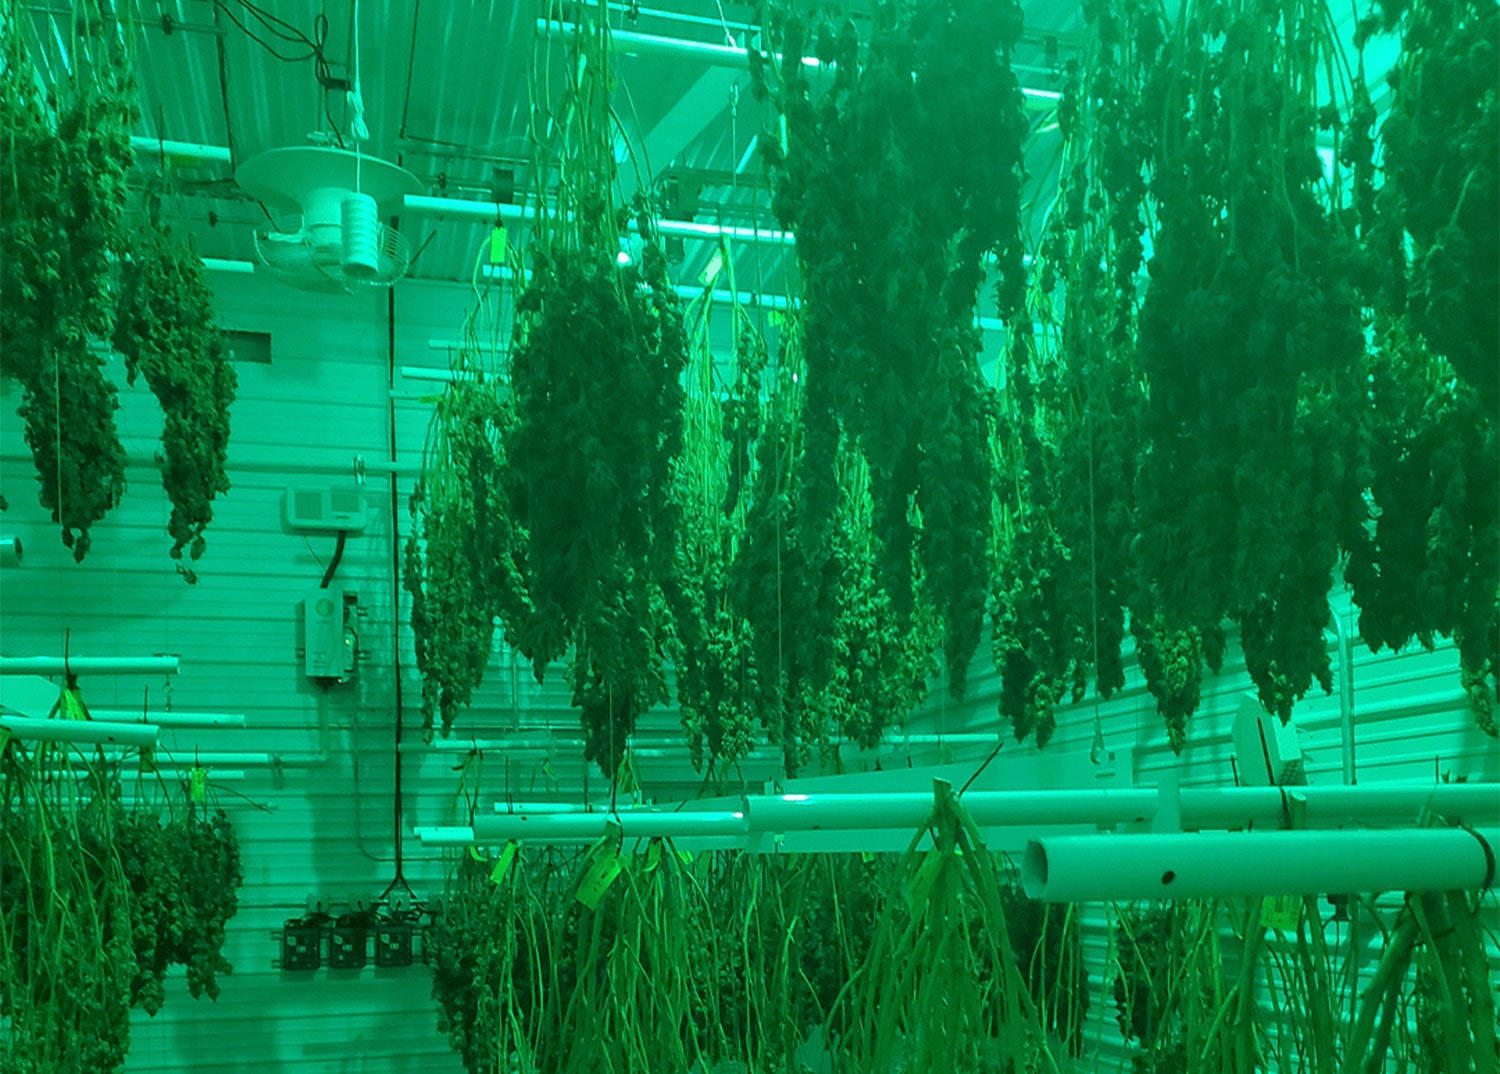 drying rack being used to improve cannabis spacing and yields